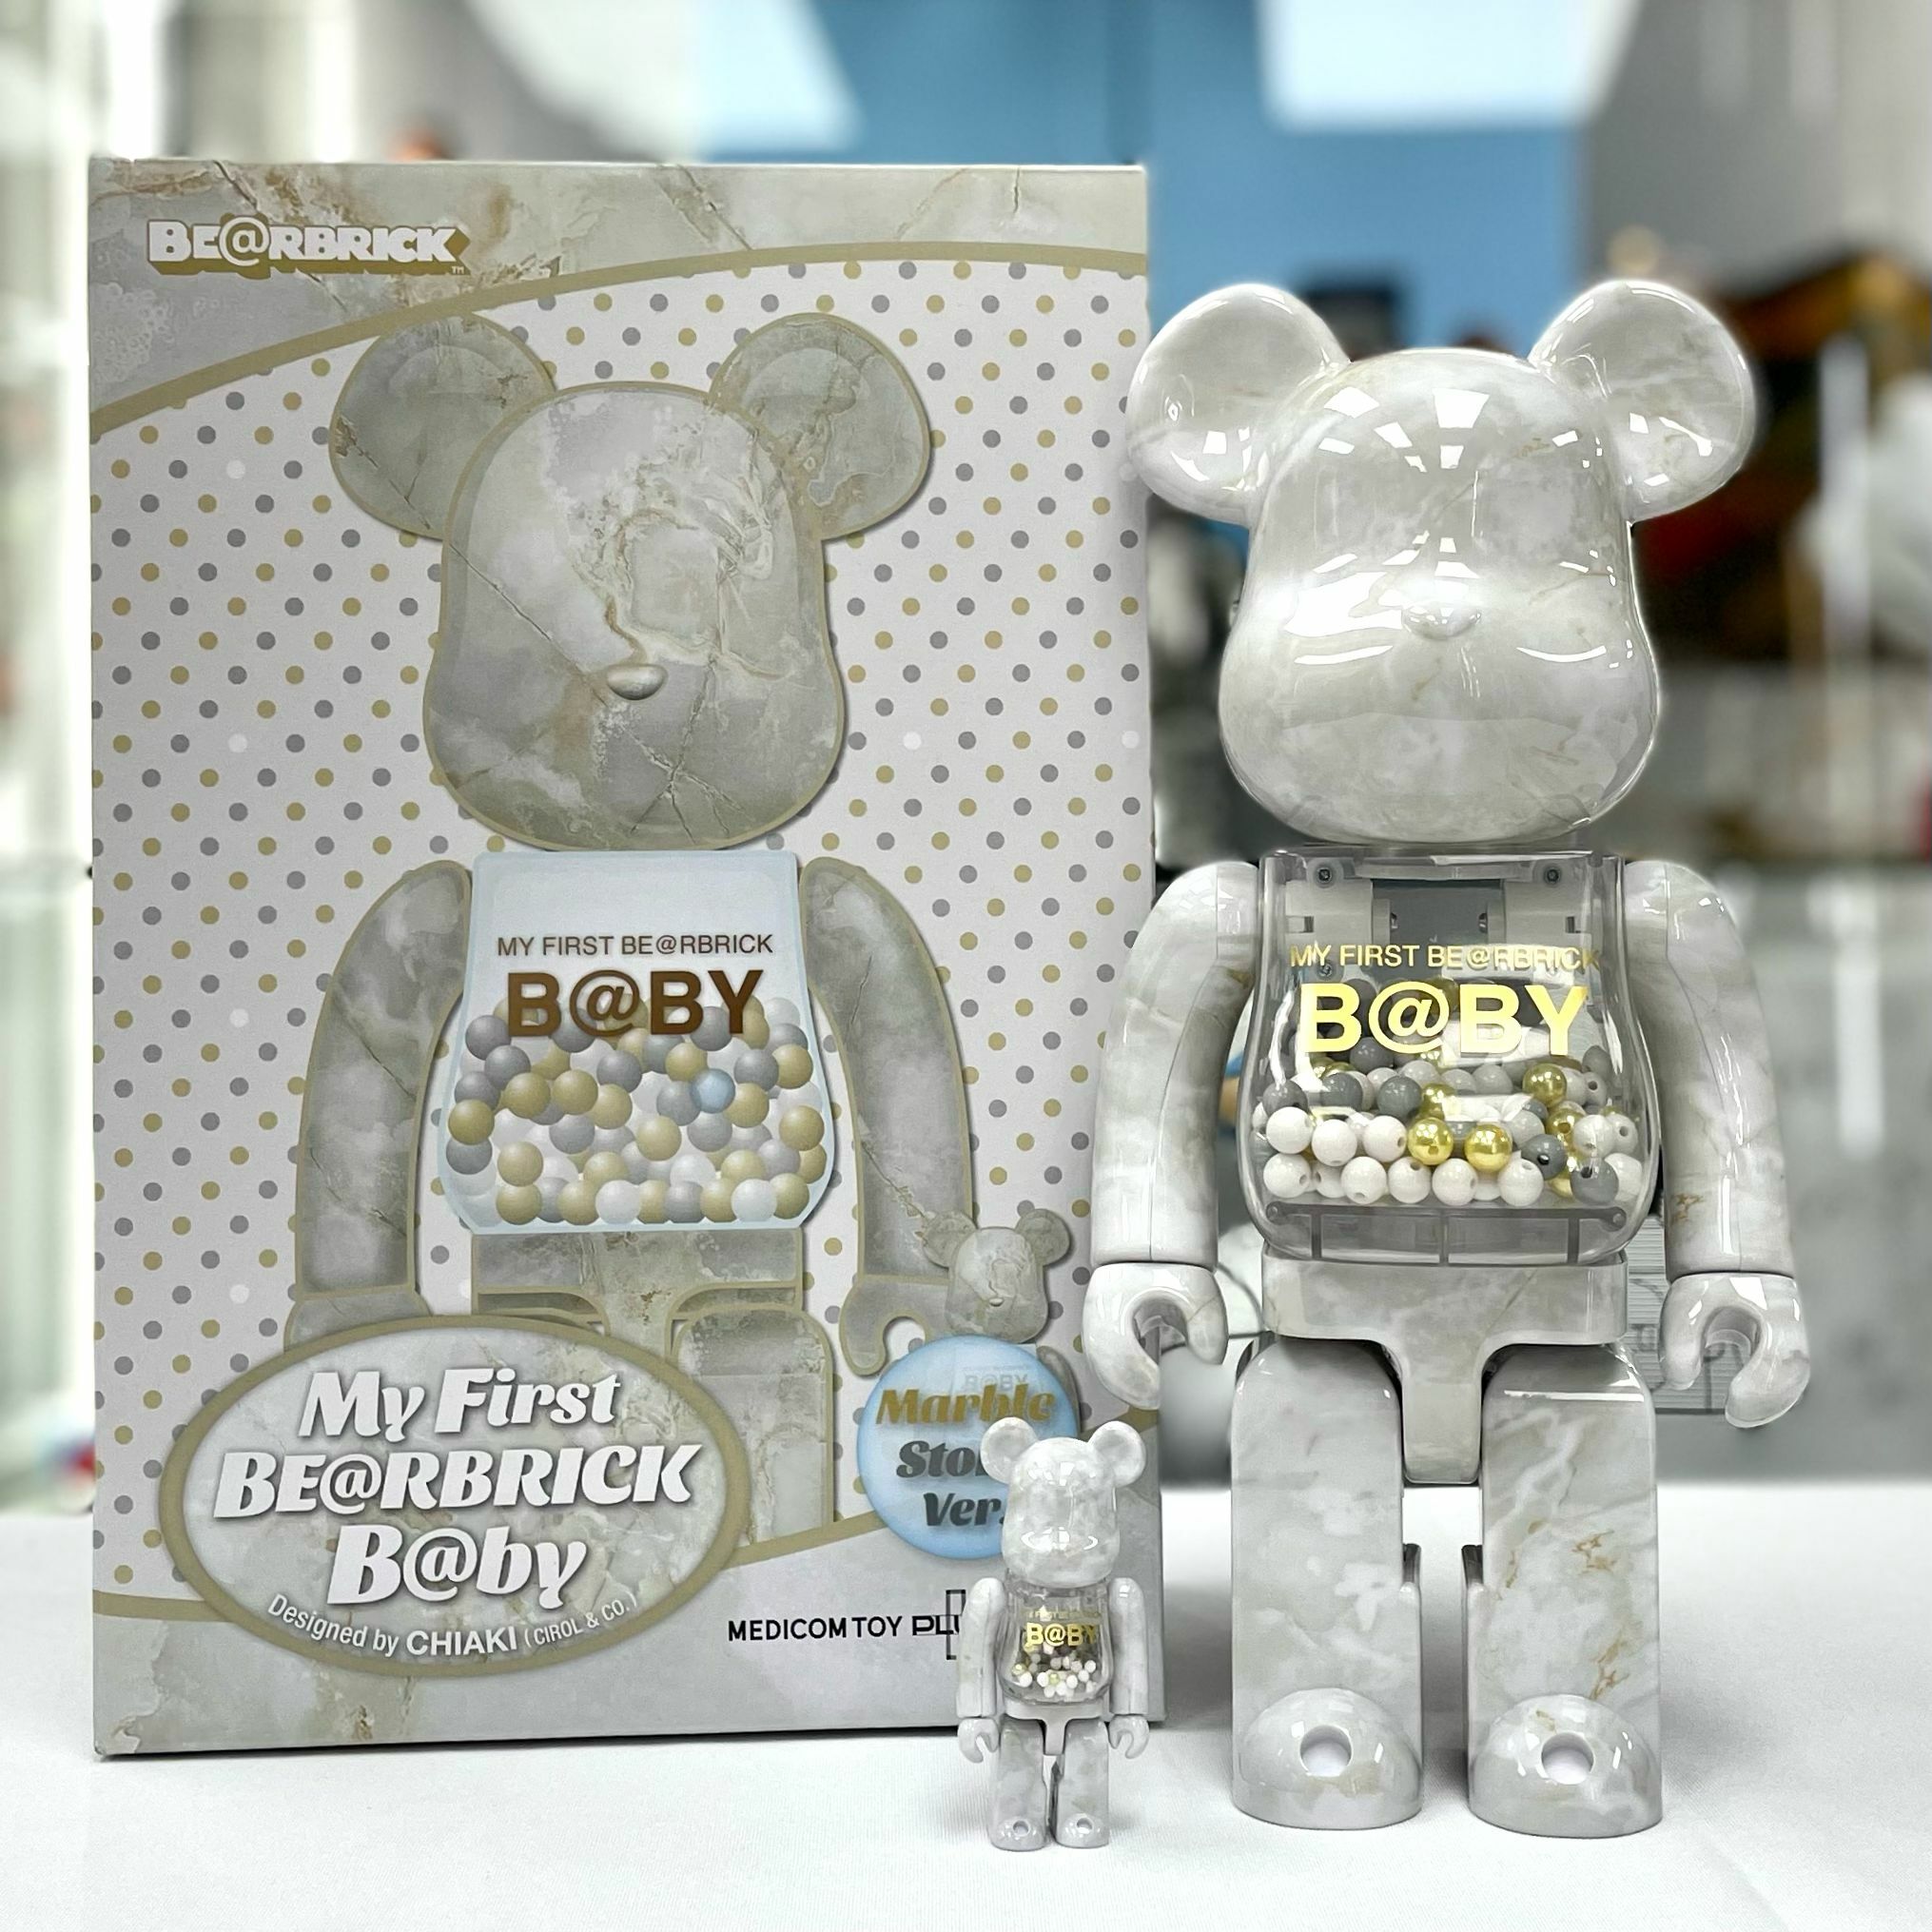 MY FIRST BE@RBRICK B@BY MARBLE Ver 1000%